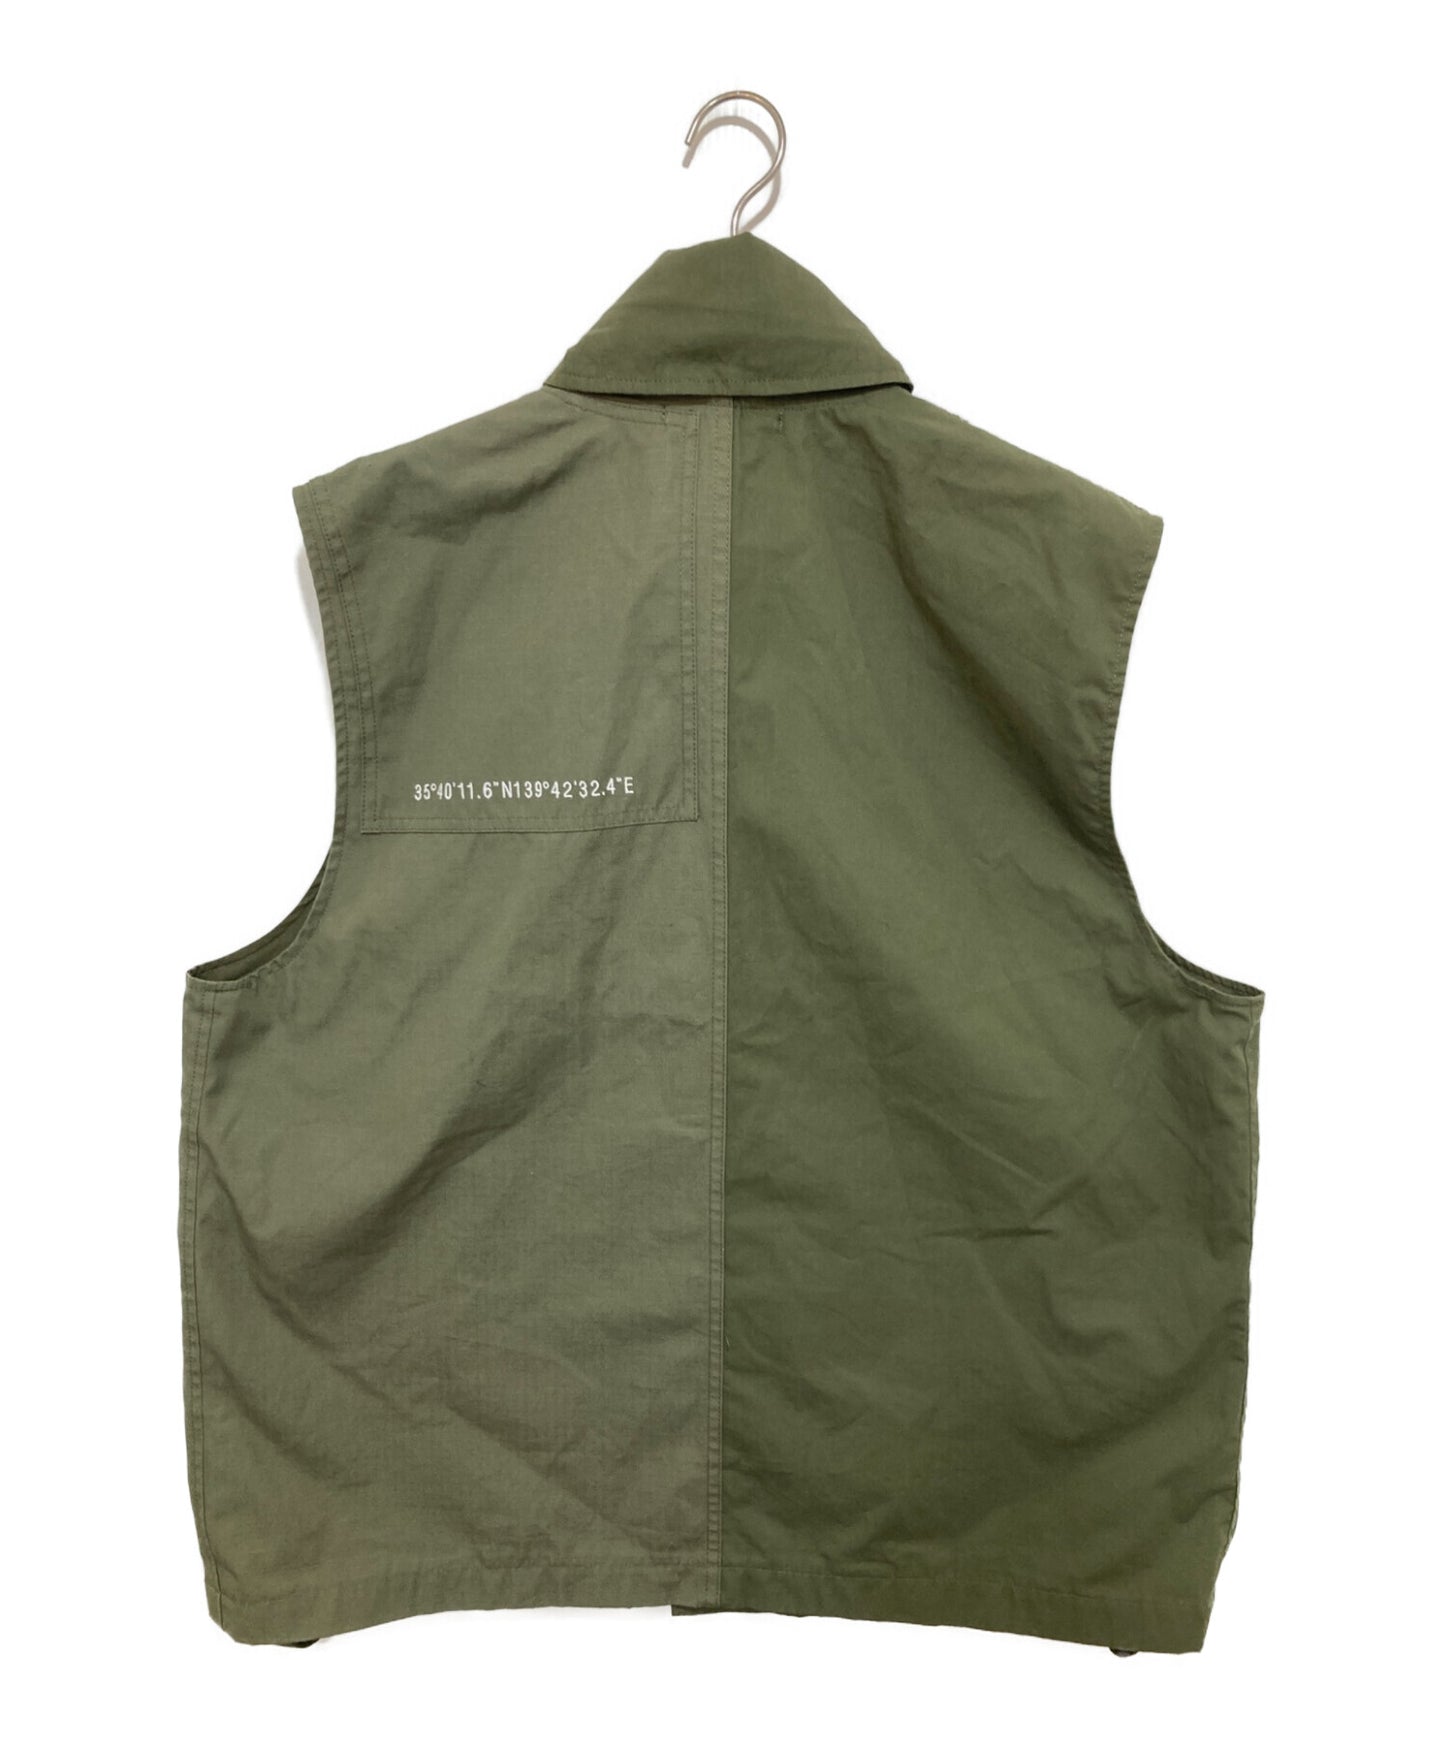 [Pre-owned] WTAPS TRADER VEST COTTON WEATHER RIPSTOP 212BRDT-JKM07